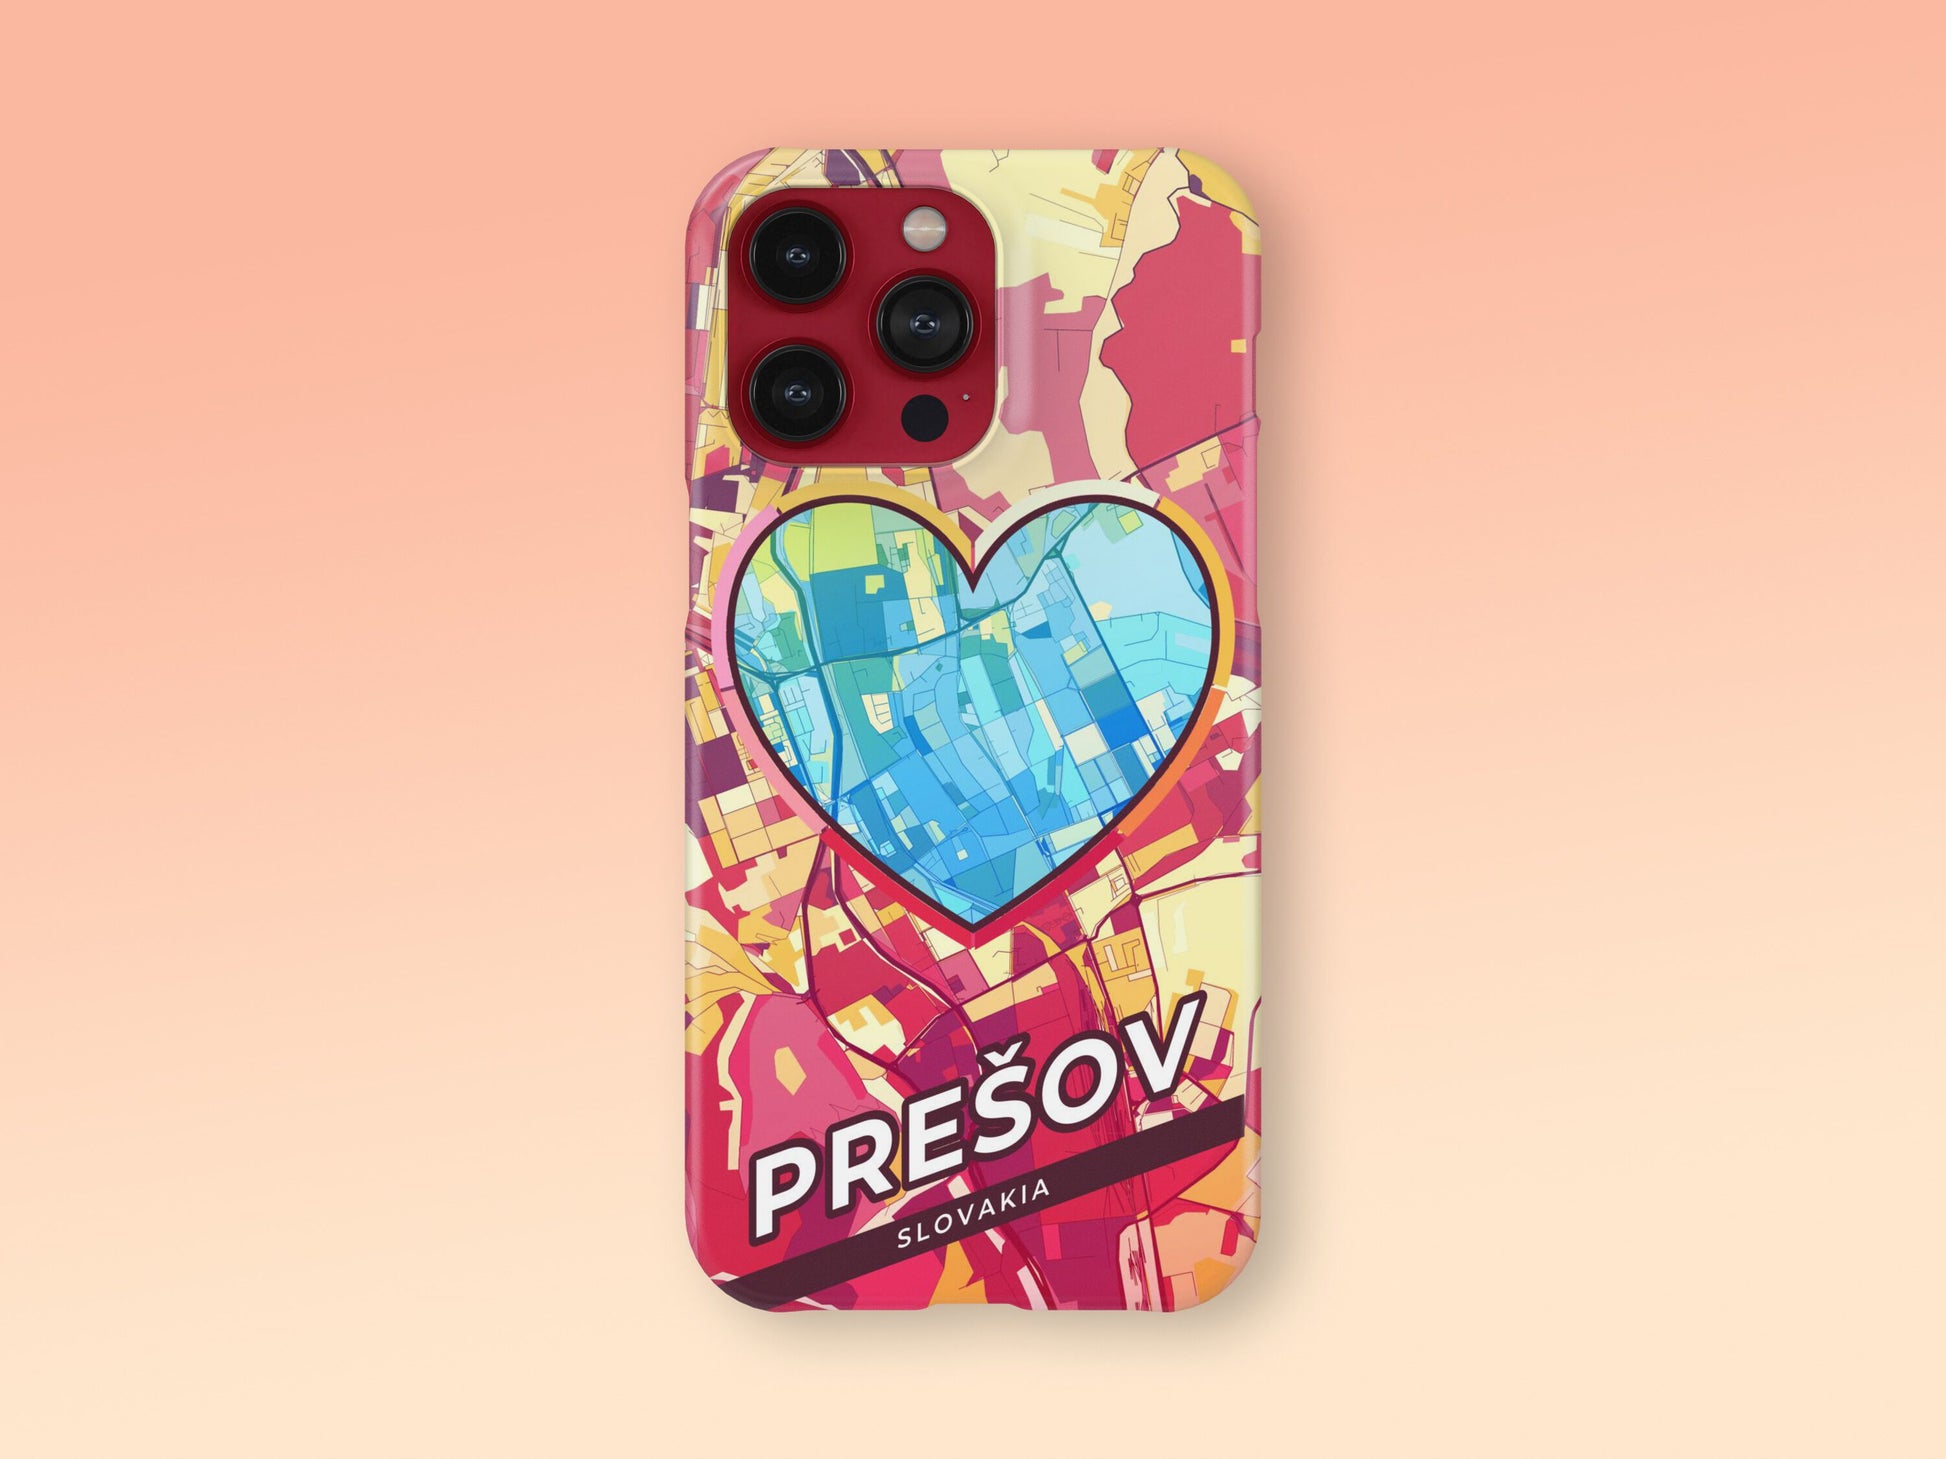 Prešov Slovakia slim phone case with colorful icon. Birthday, wedding or housewarming gift. Couple match cases. 2